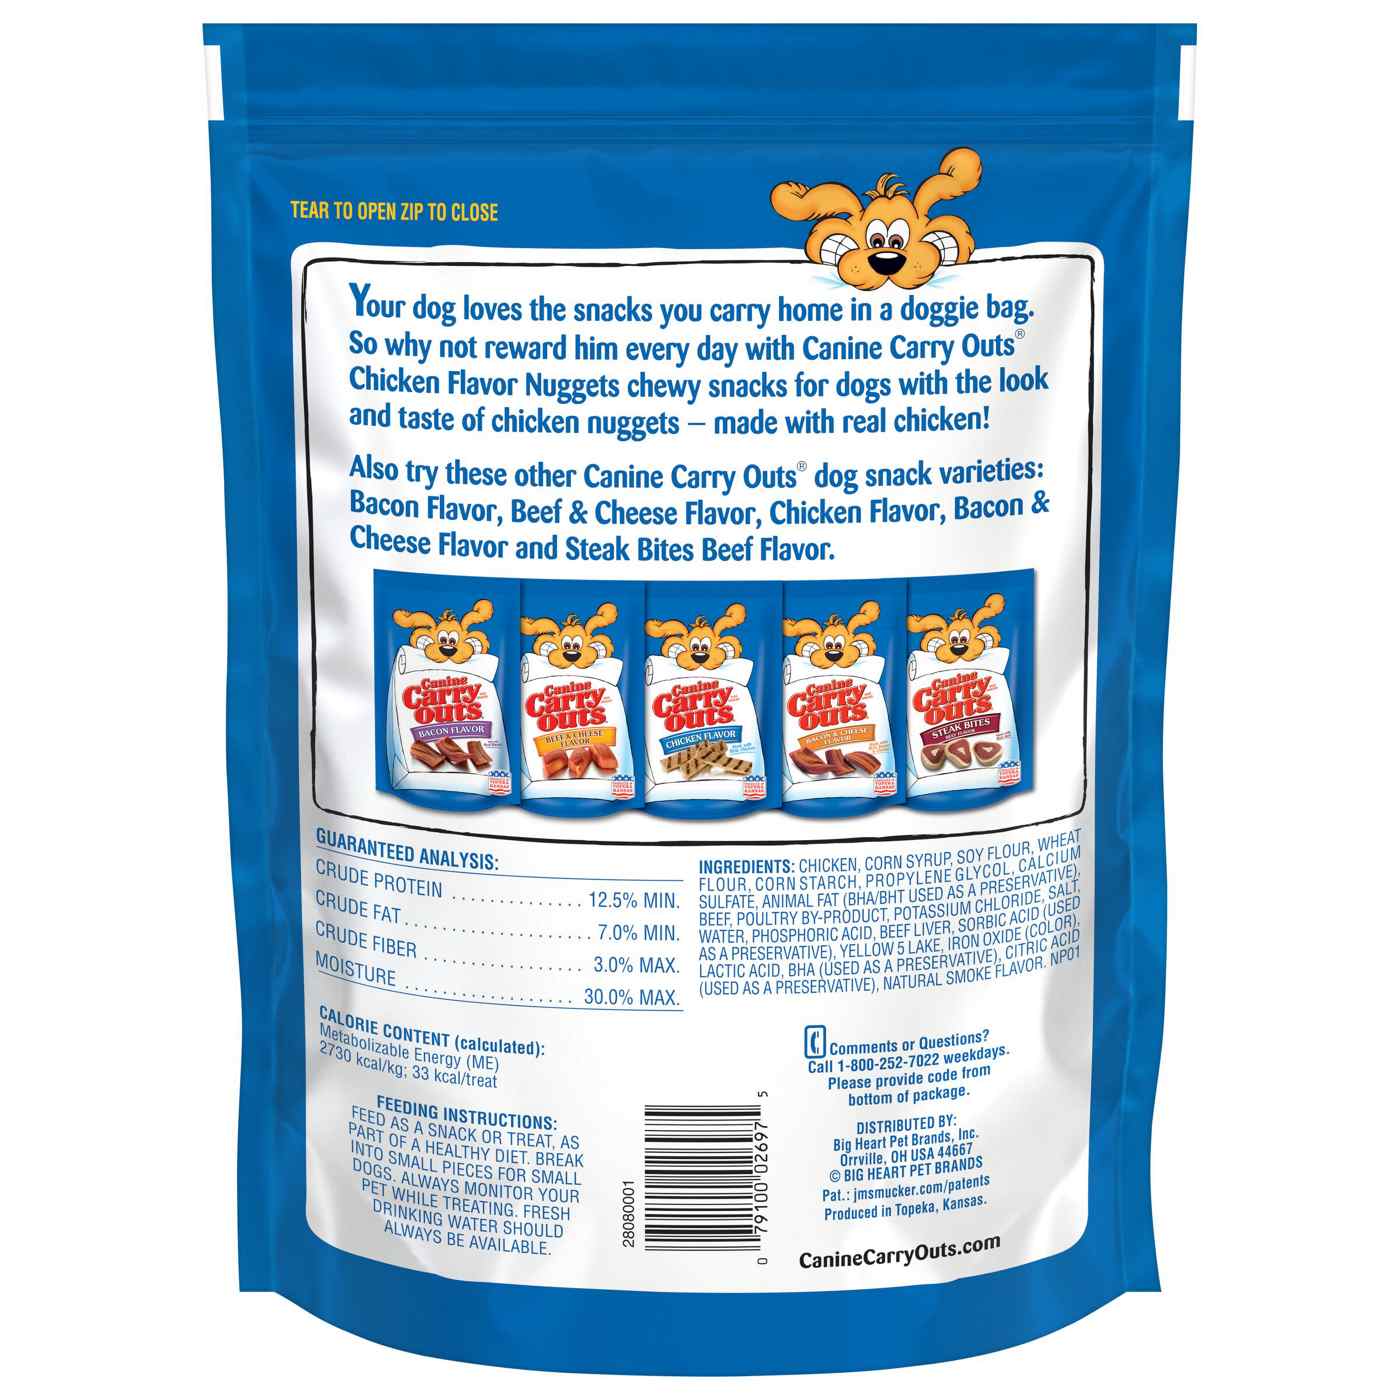 Canine Carry Outs Chicken Flavor Nuggets Dog Treats; image 2 of 2